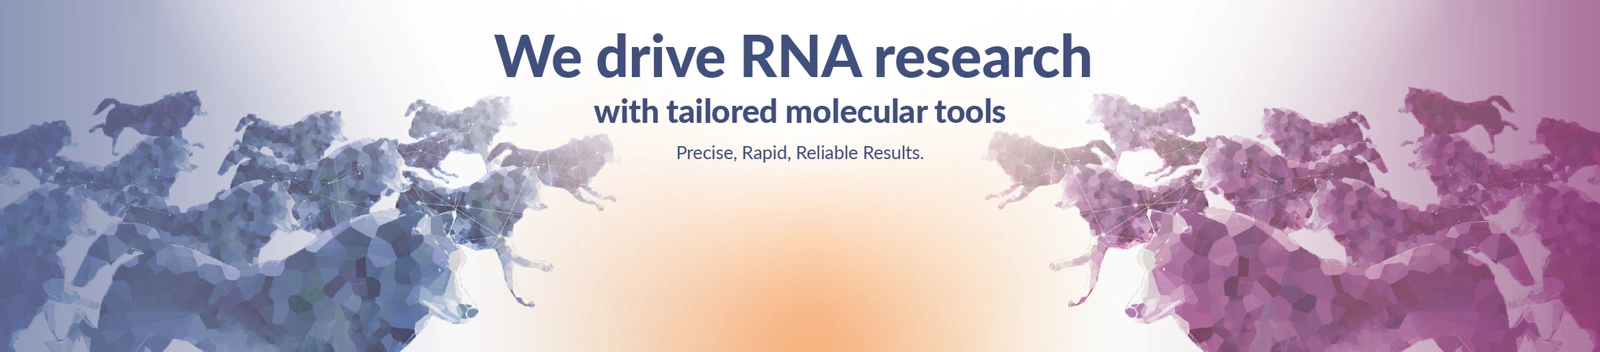 We drive RNA Research with Advanced Molecular Tools